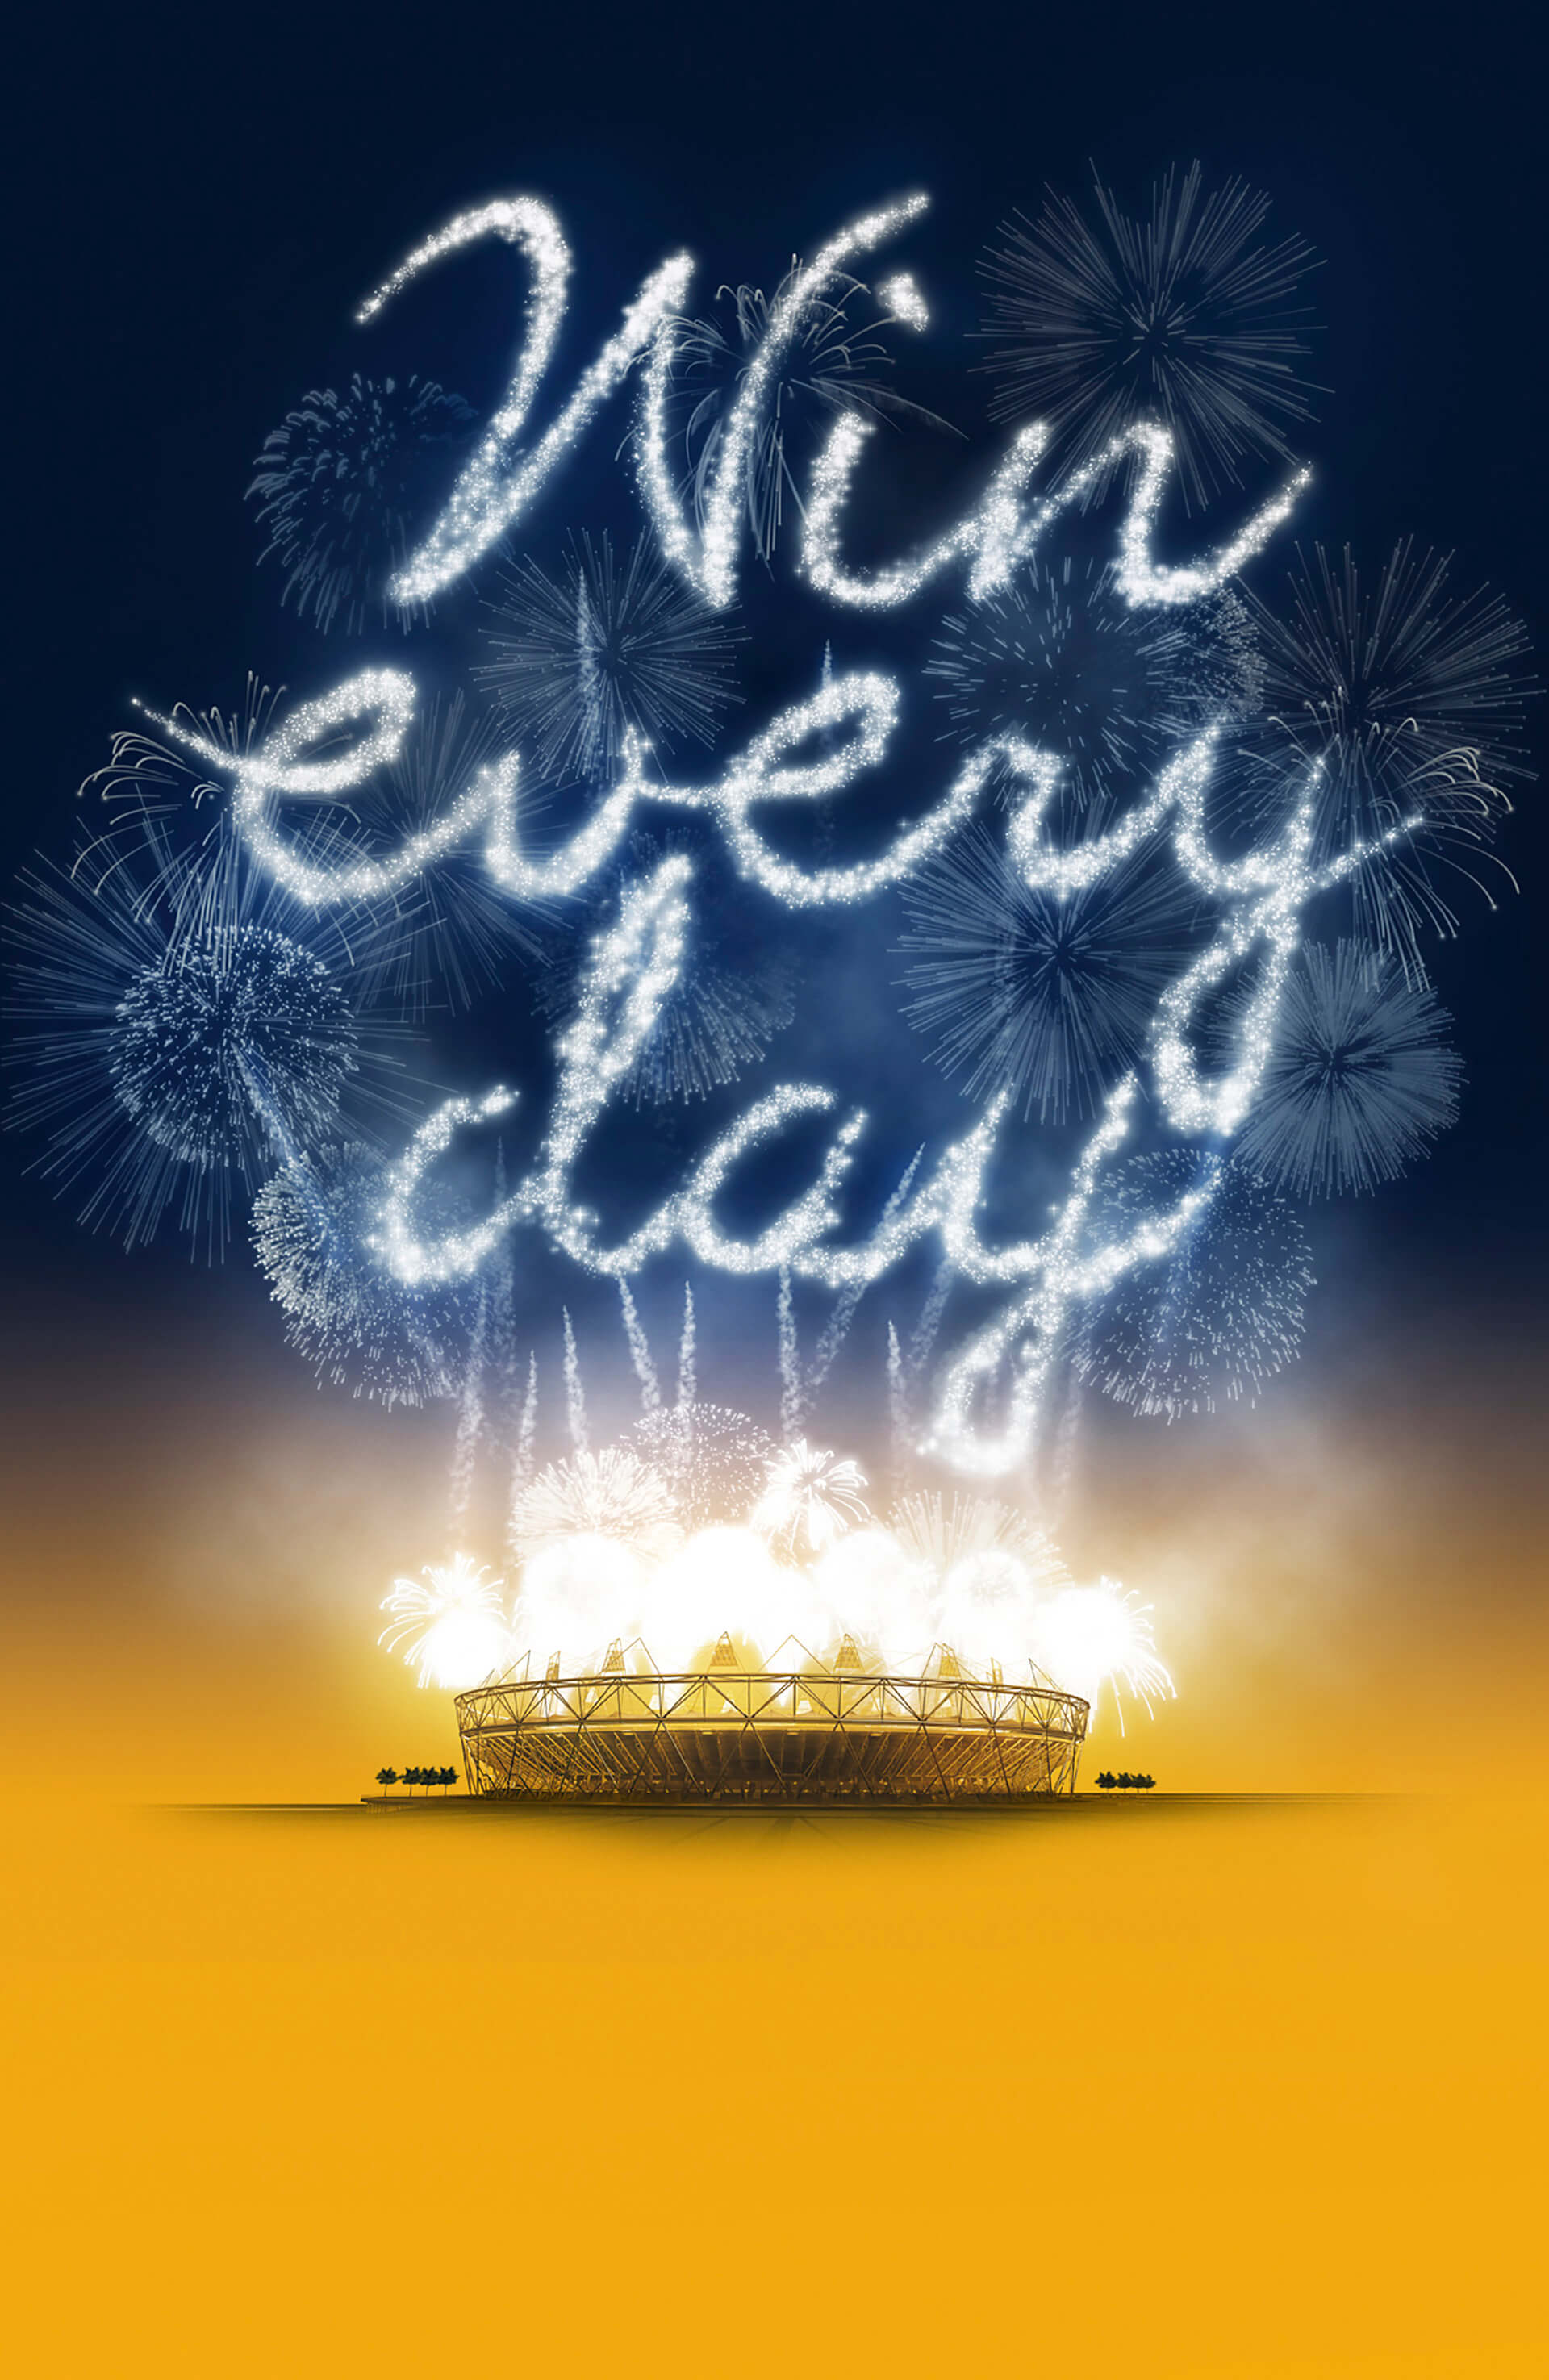 3d image created for Visa, modelled and rendered in 3dsmax text and fireworks created in after effects